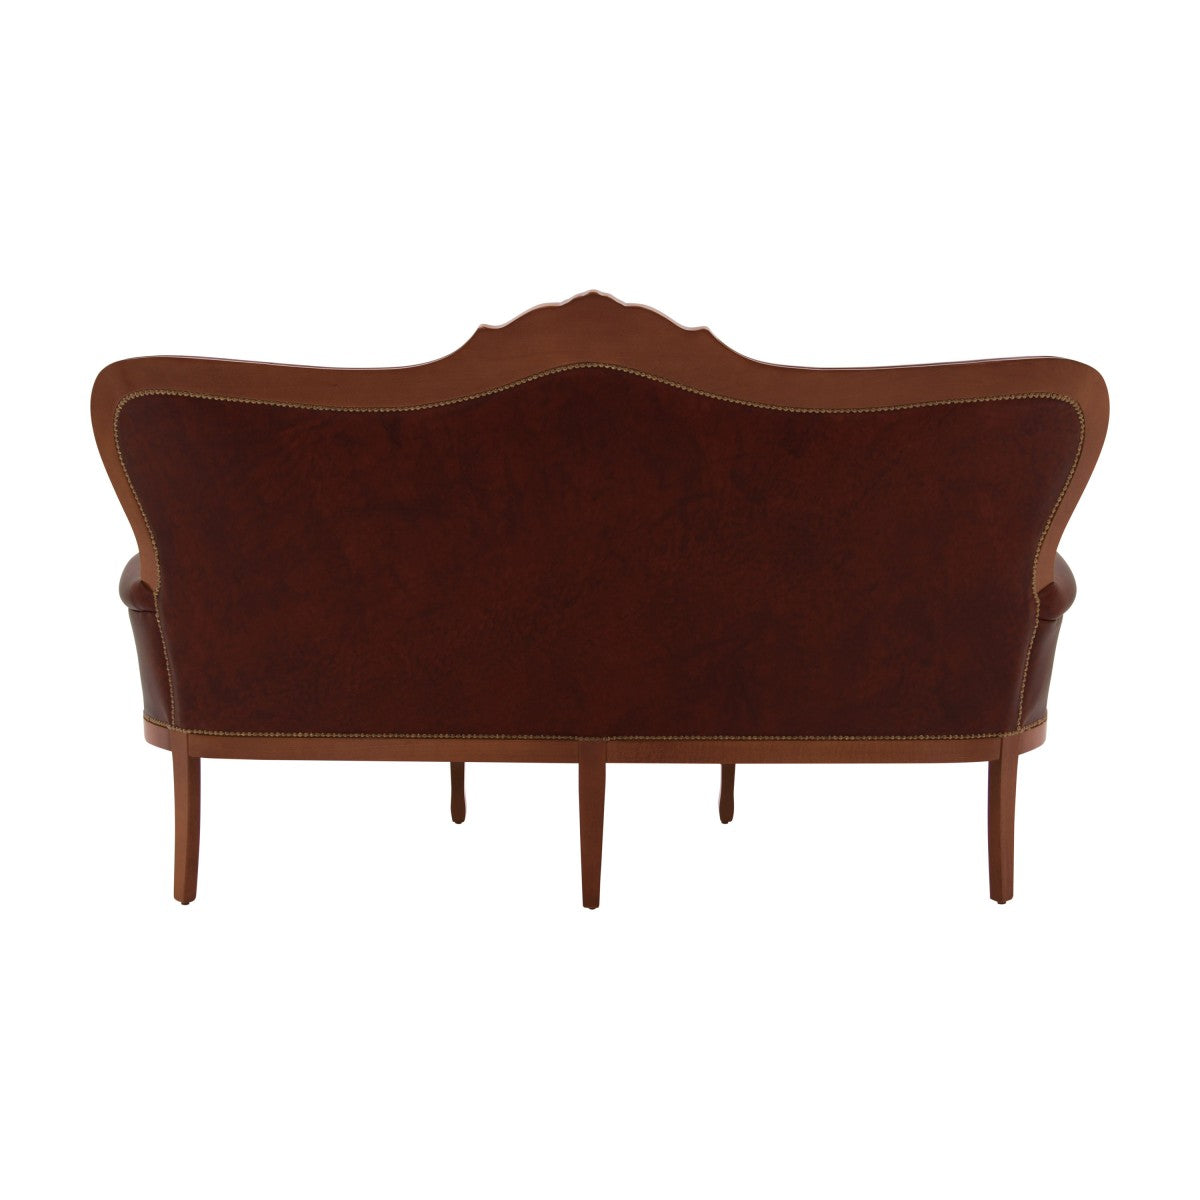 Foglia Bespoke Upholstered Carved Back Louis Philippe Style Three Seater Sofa MS218E Custom Made To Order